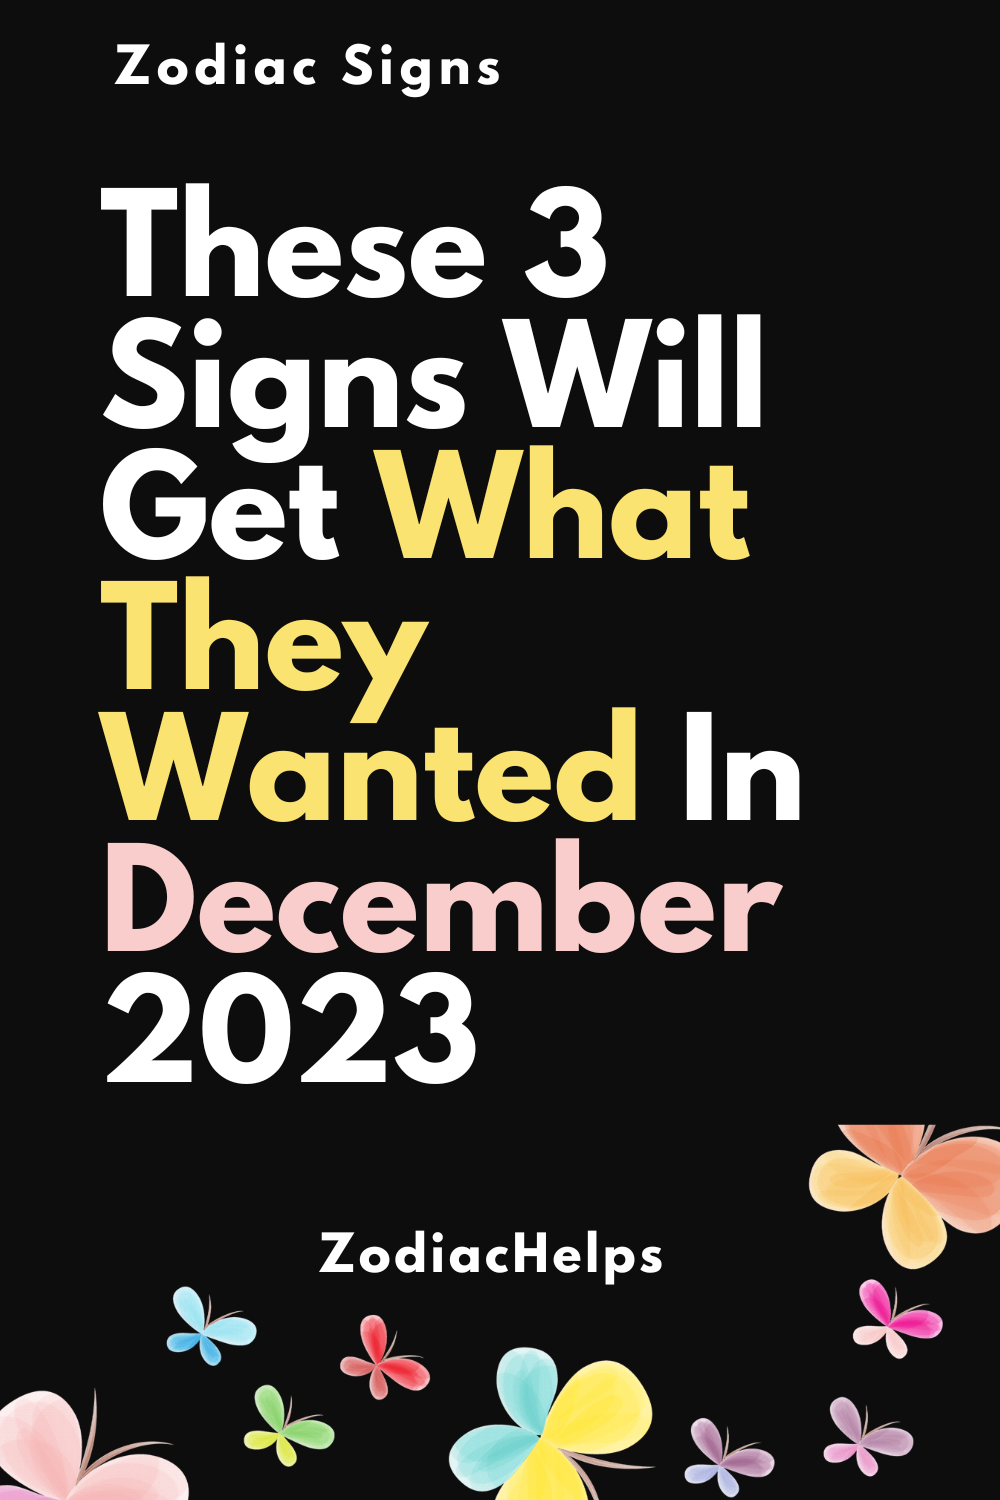 These 3 Signs Will Get What They Wanted In December 2023